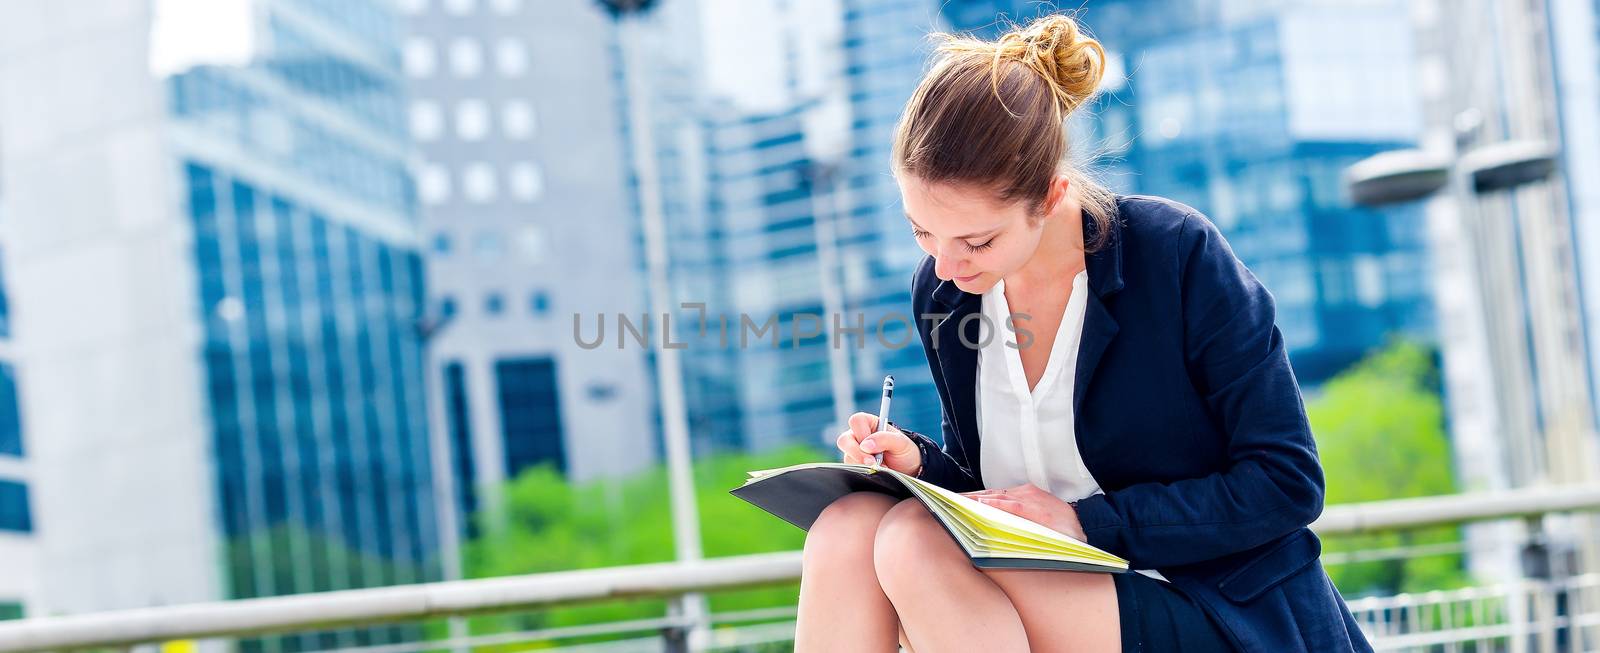 dynamic young executive taking notes on her agenda by pixinoo